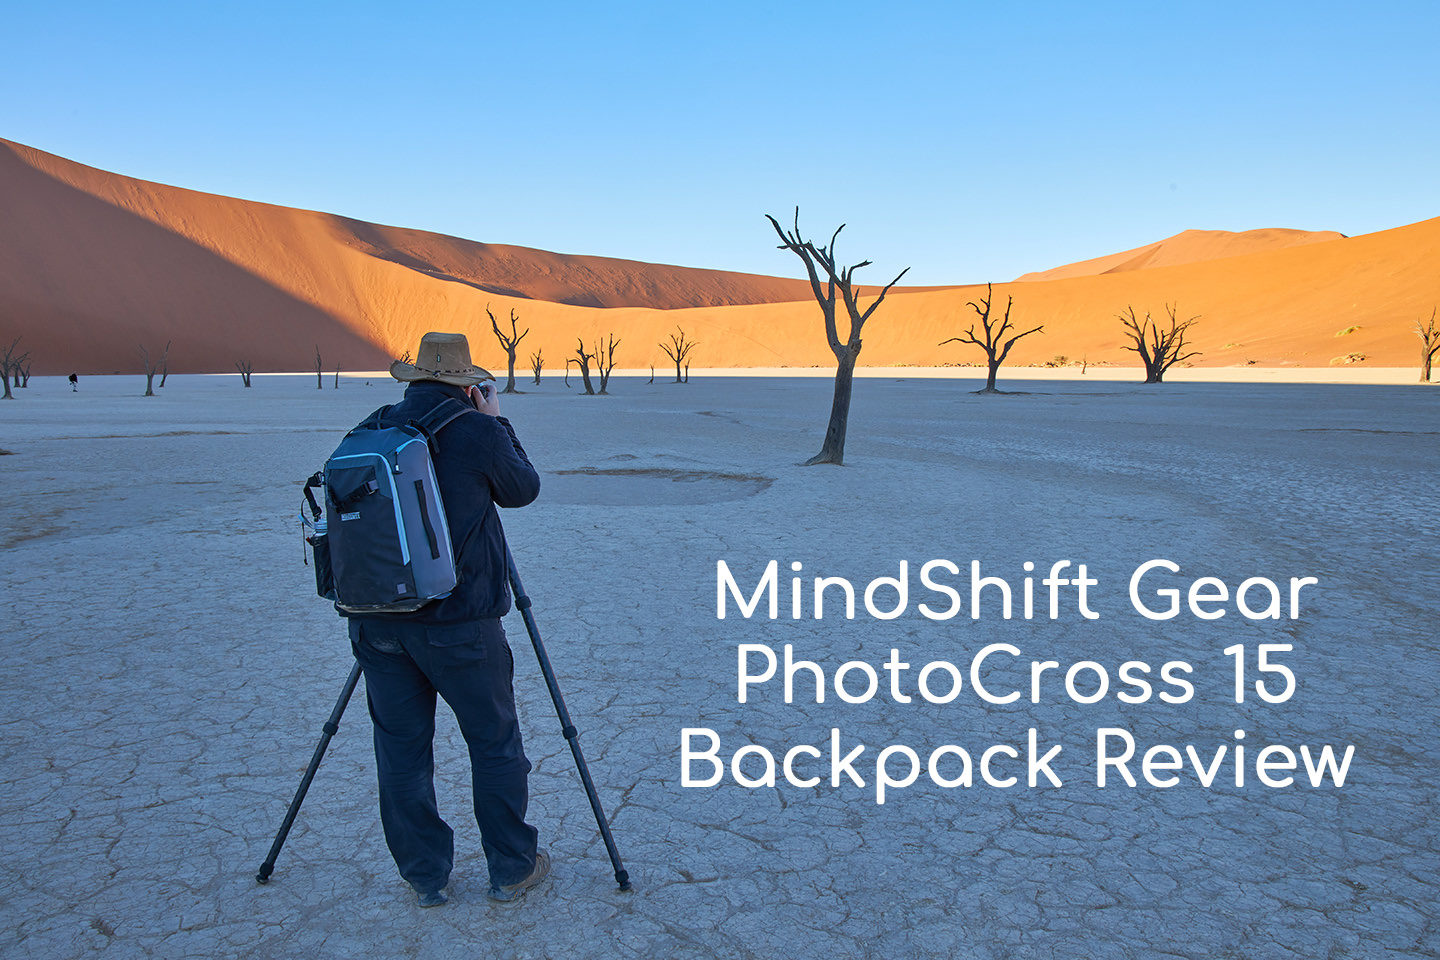 MindShift Gear PhotoCross 15 Backpack Review